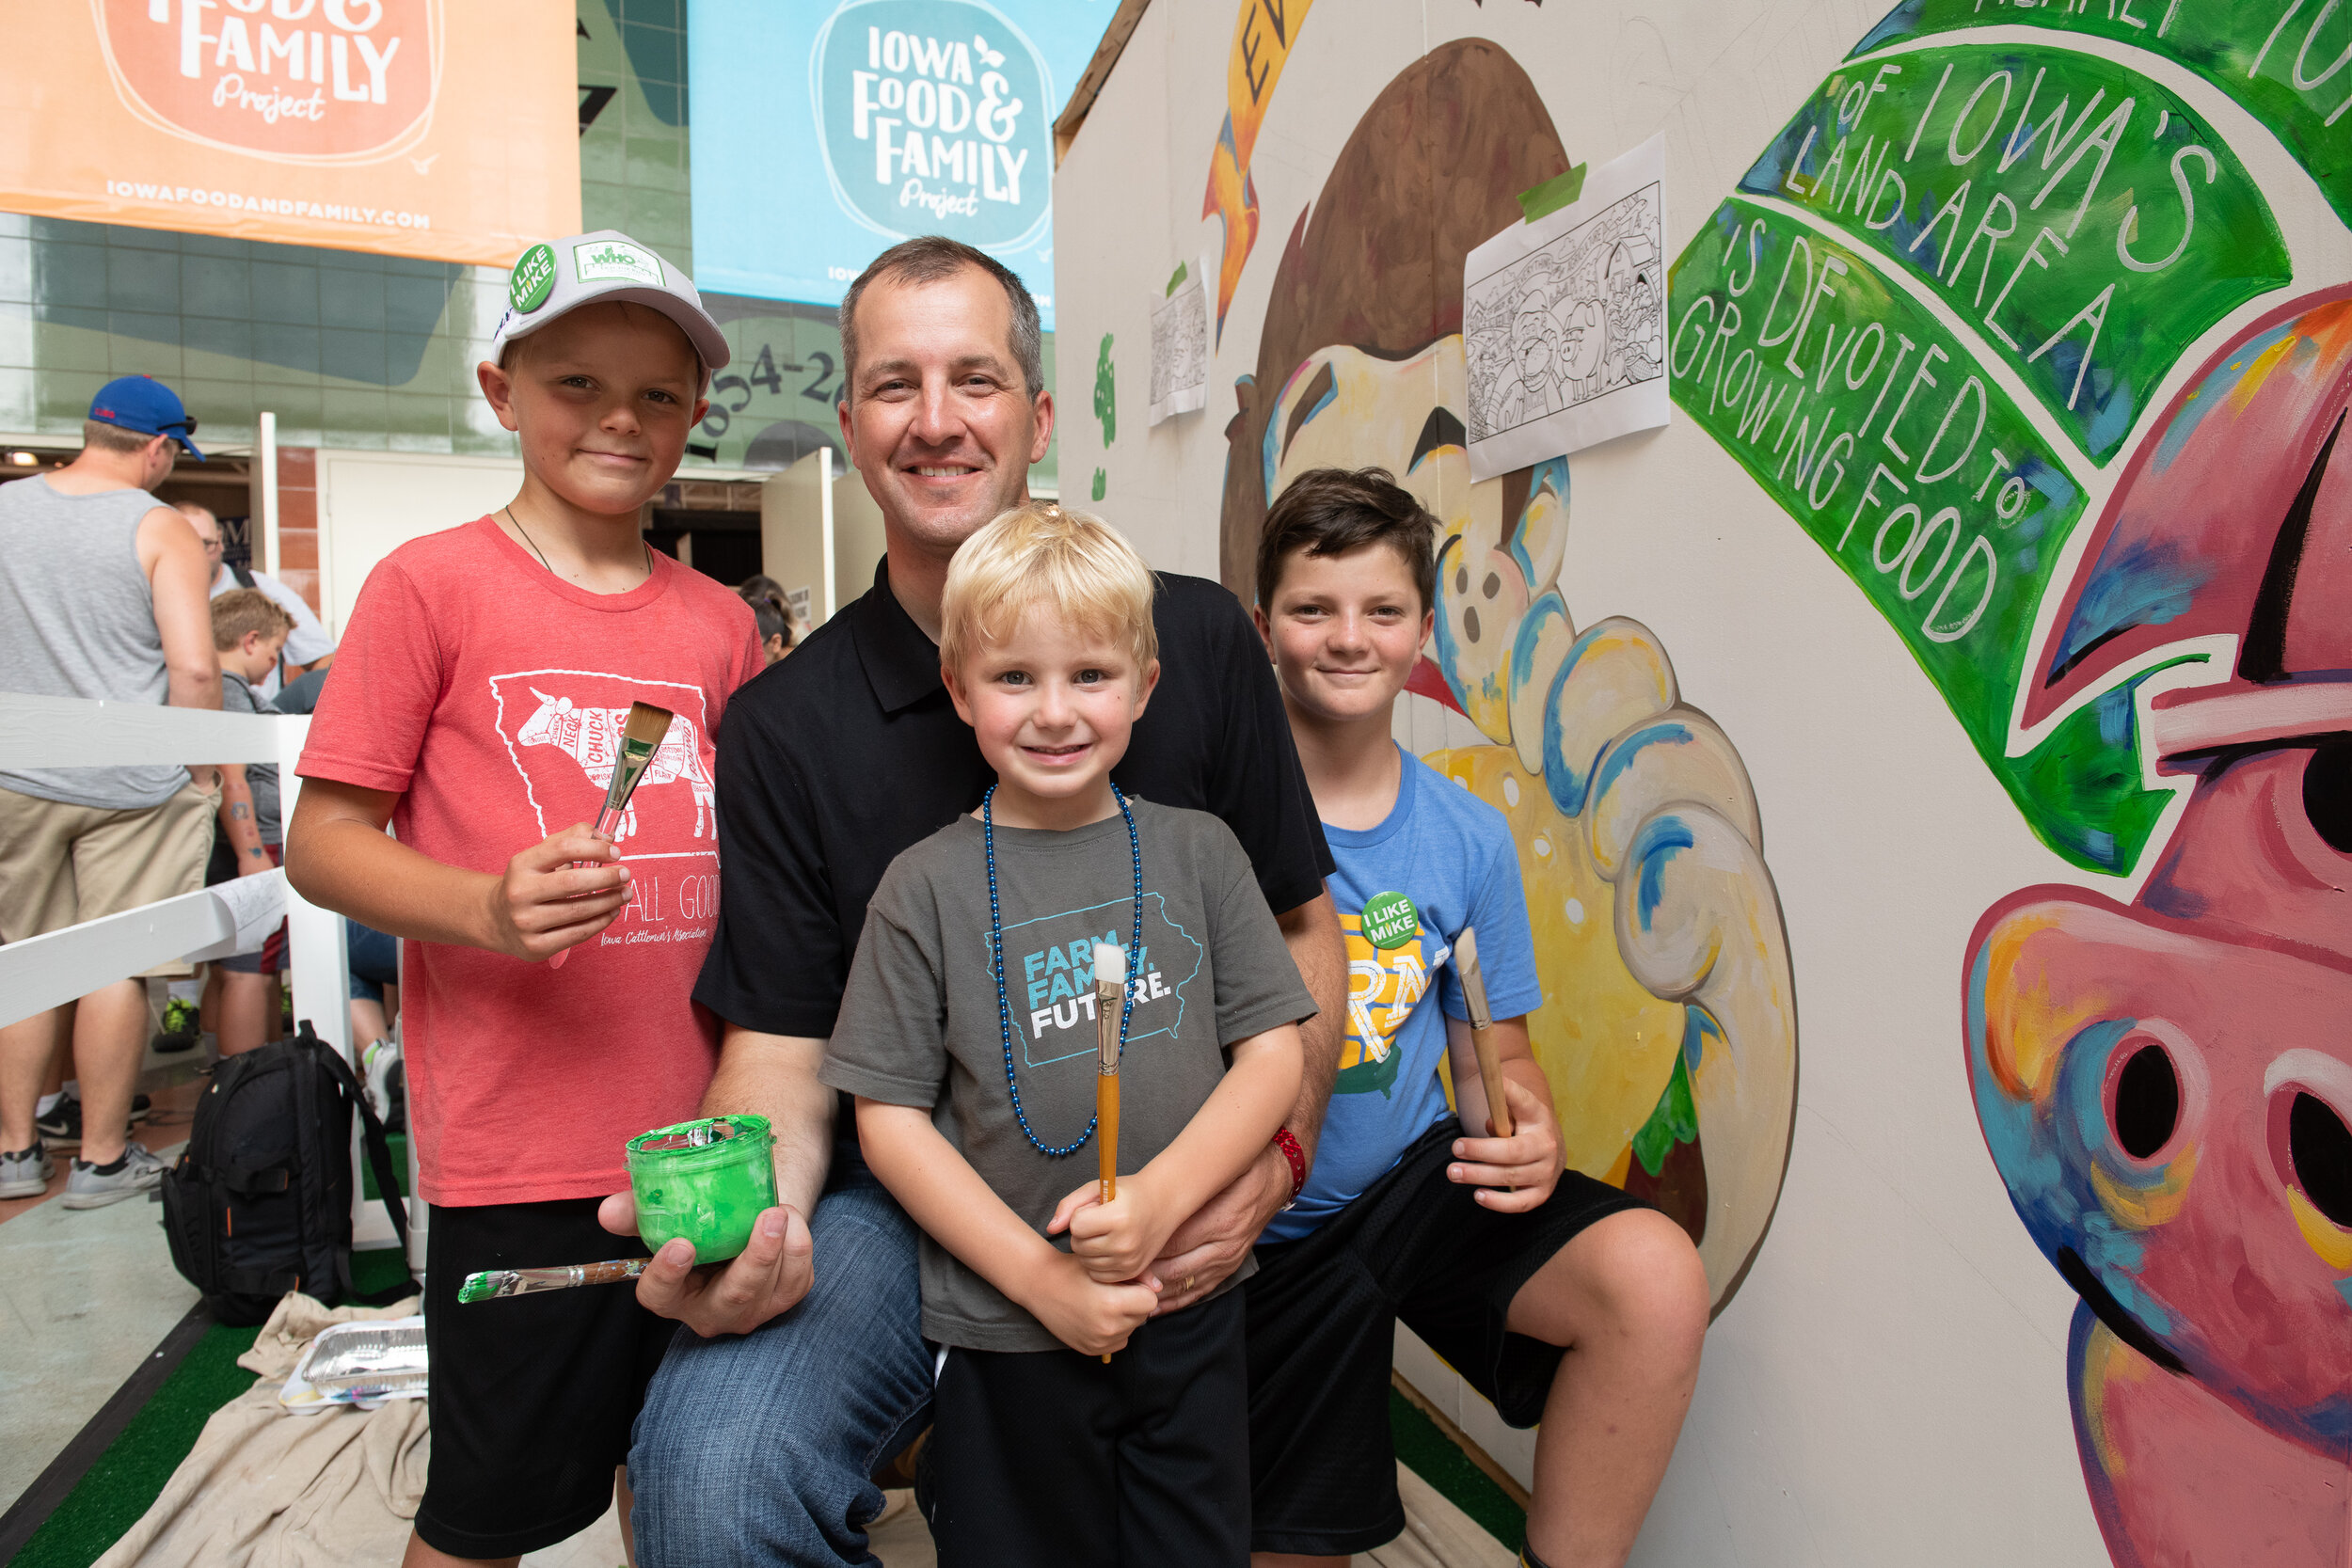 The 2018 display included a mural that was painted during the course of the fair. Pictured is Iowa Secretary of Agriculture Mike Naig and his family who jumped in as guest painters.